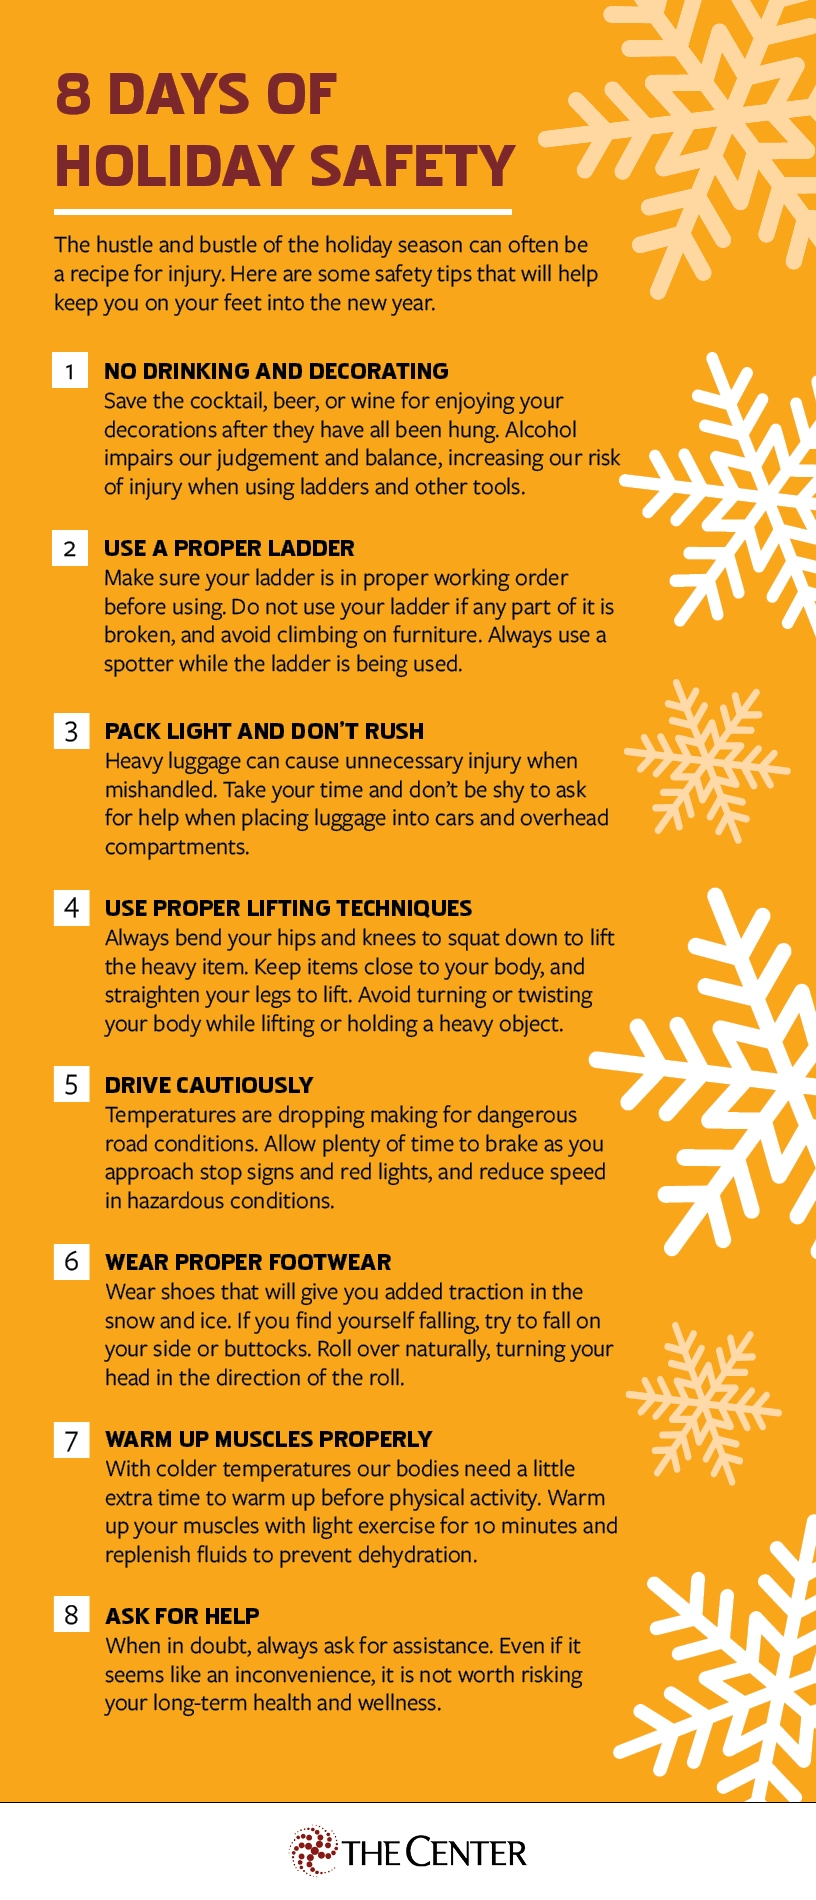 5 Tips for Keeping Warm at Work